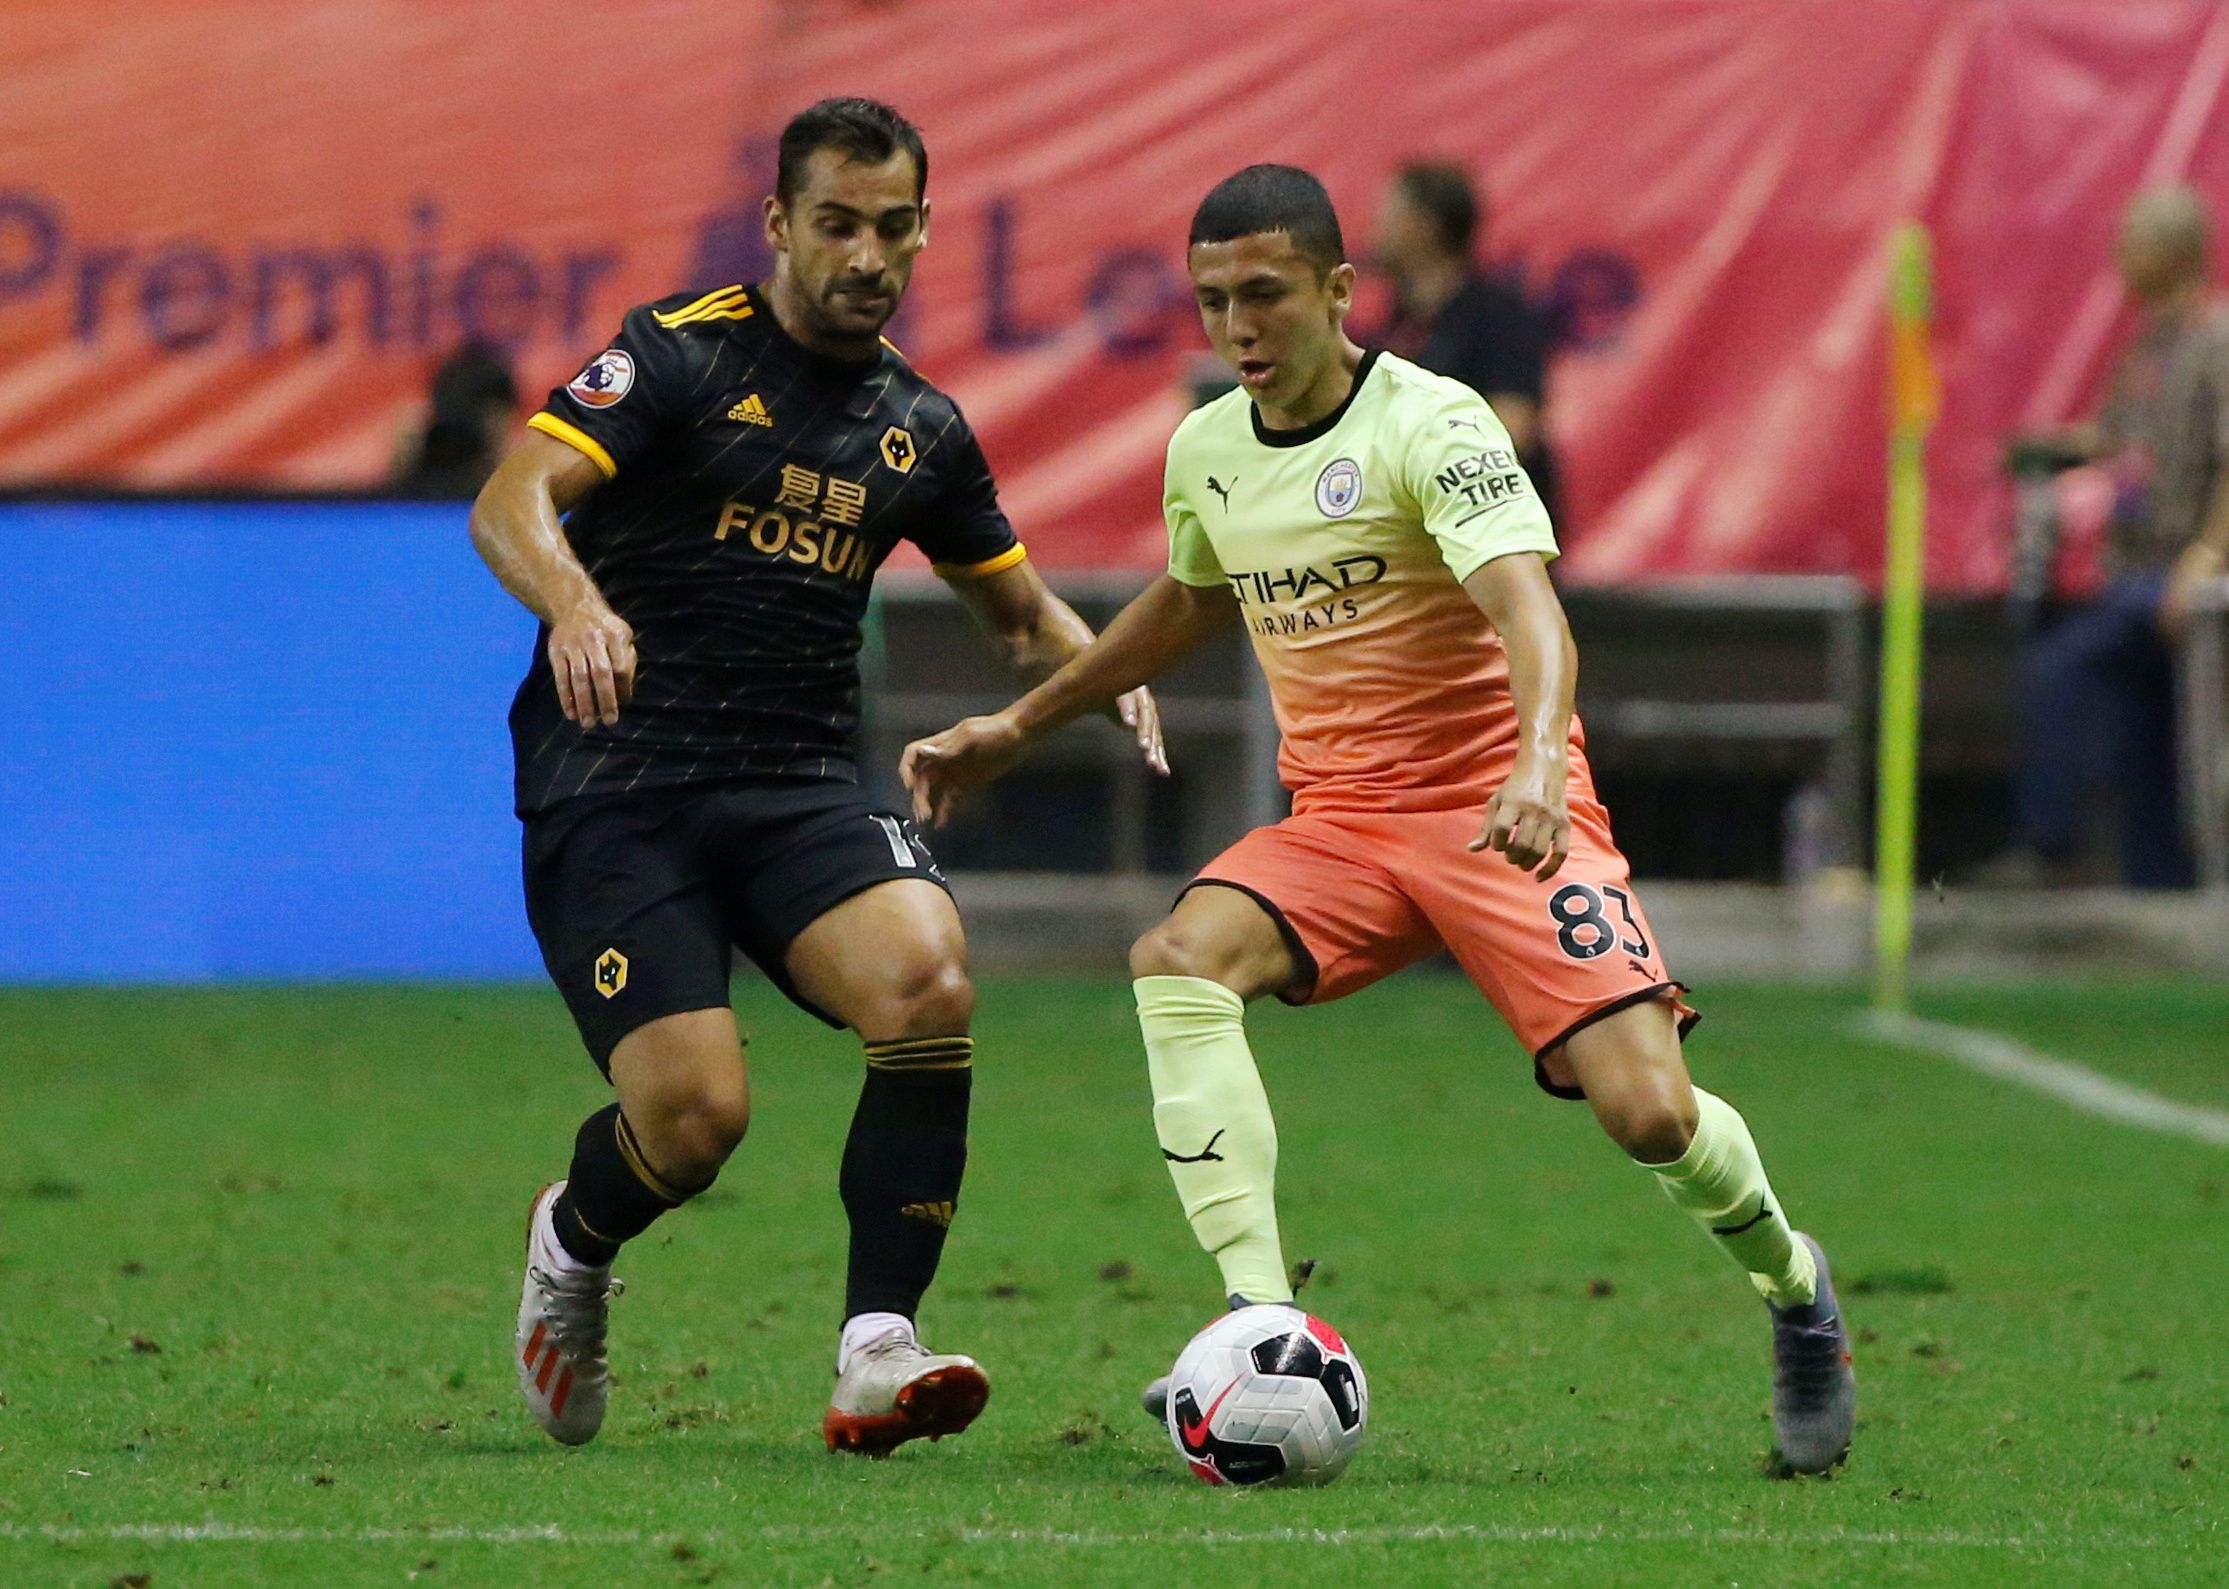 Soccer Football - Premier League Asia Trophy - Wolverhampton Wanderers v Manchester City - Hongkou Football Stadium, Shanghai, China - July 20, 2019  Manchester City's Ian Carlo Poveda in action with Wolverhampton Wanderers' Jonny Castro   REUTERS/Thomas Peter